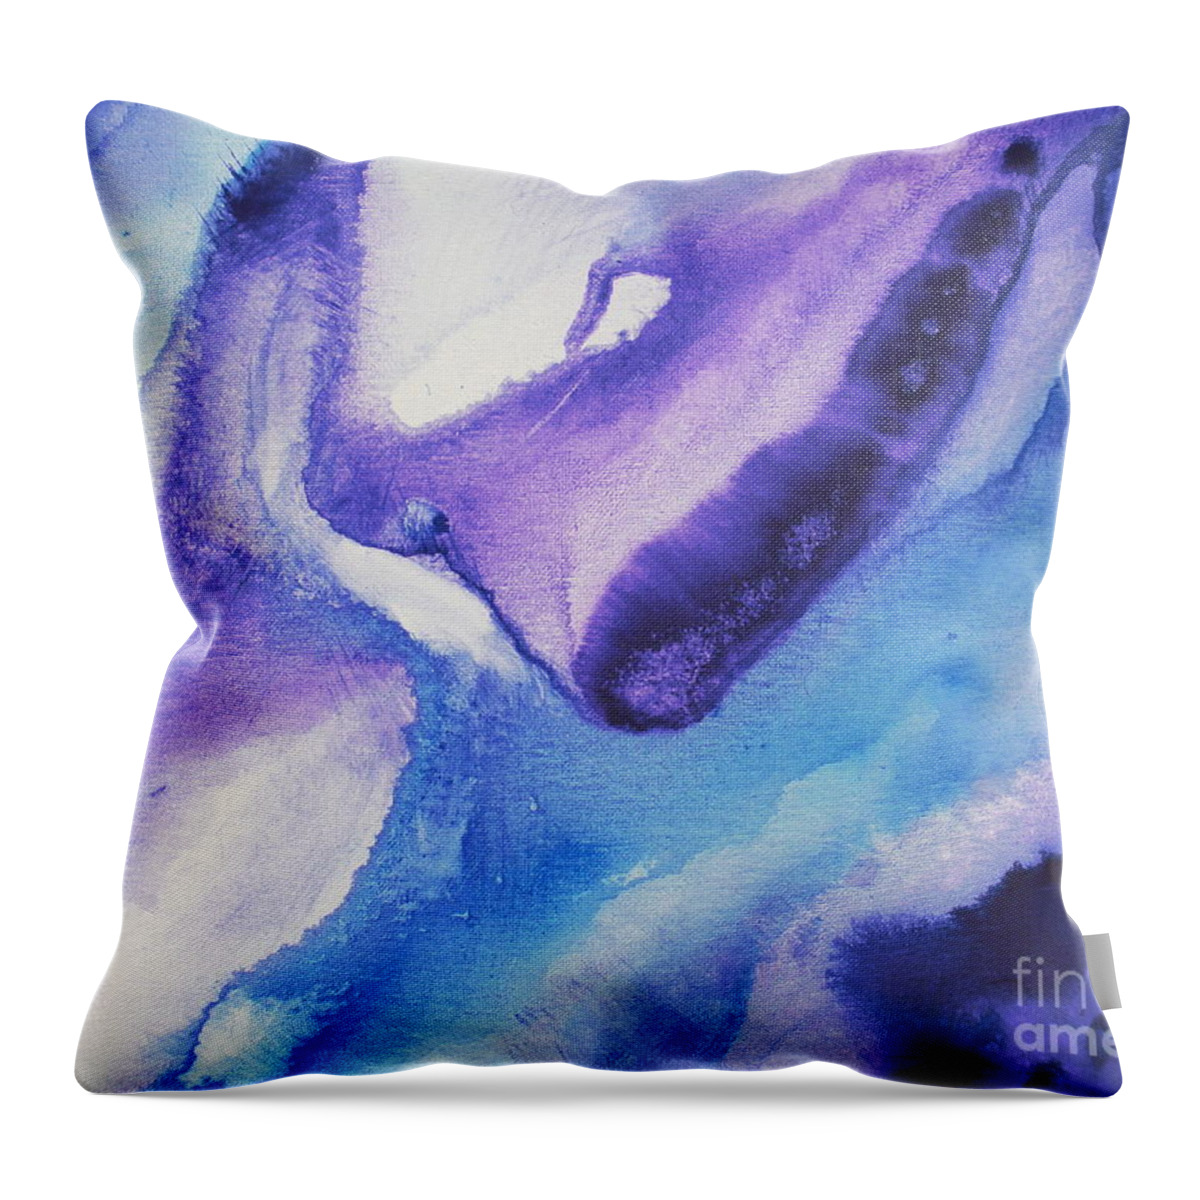 Abstract Throw Pillow featuring the painting Aura by Shiela Gosselin